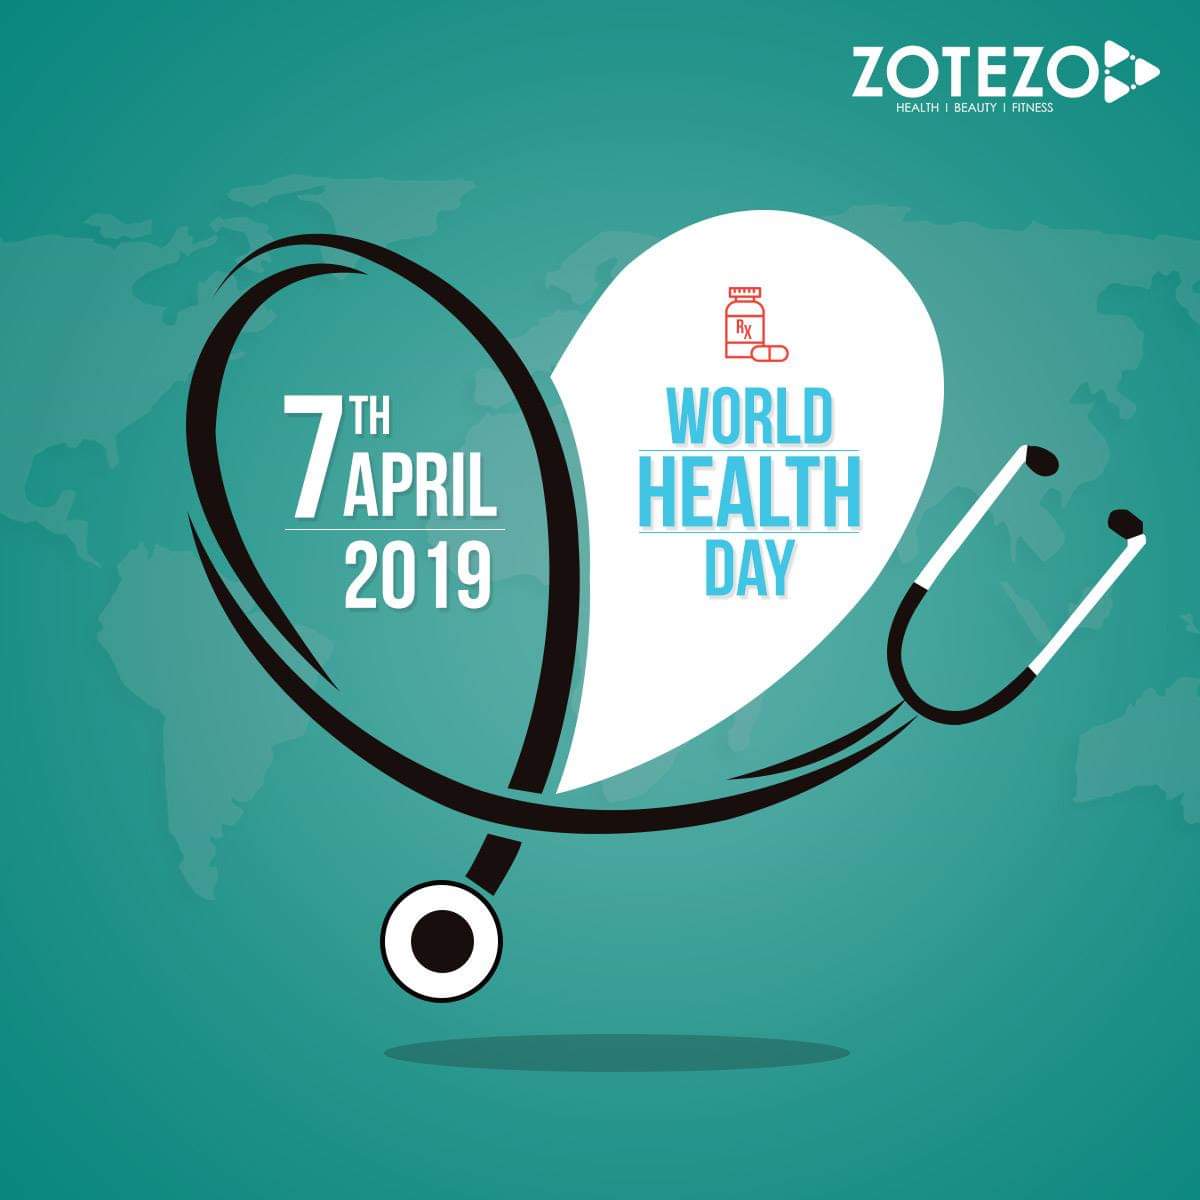 Make everyday a healthy day! This World Health Day, give the deserved attention to your health... #WorldHealthDay #behealthy #healthiswealth #HealthyLiving #healthawareness #HealthForAll